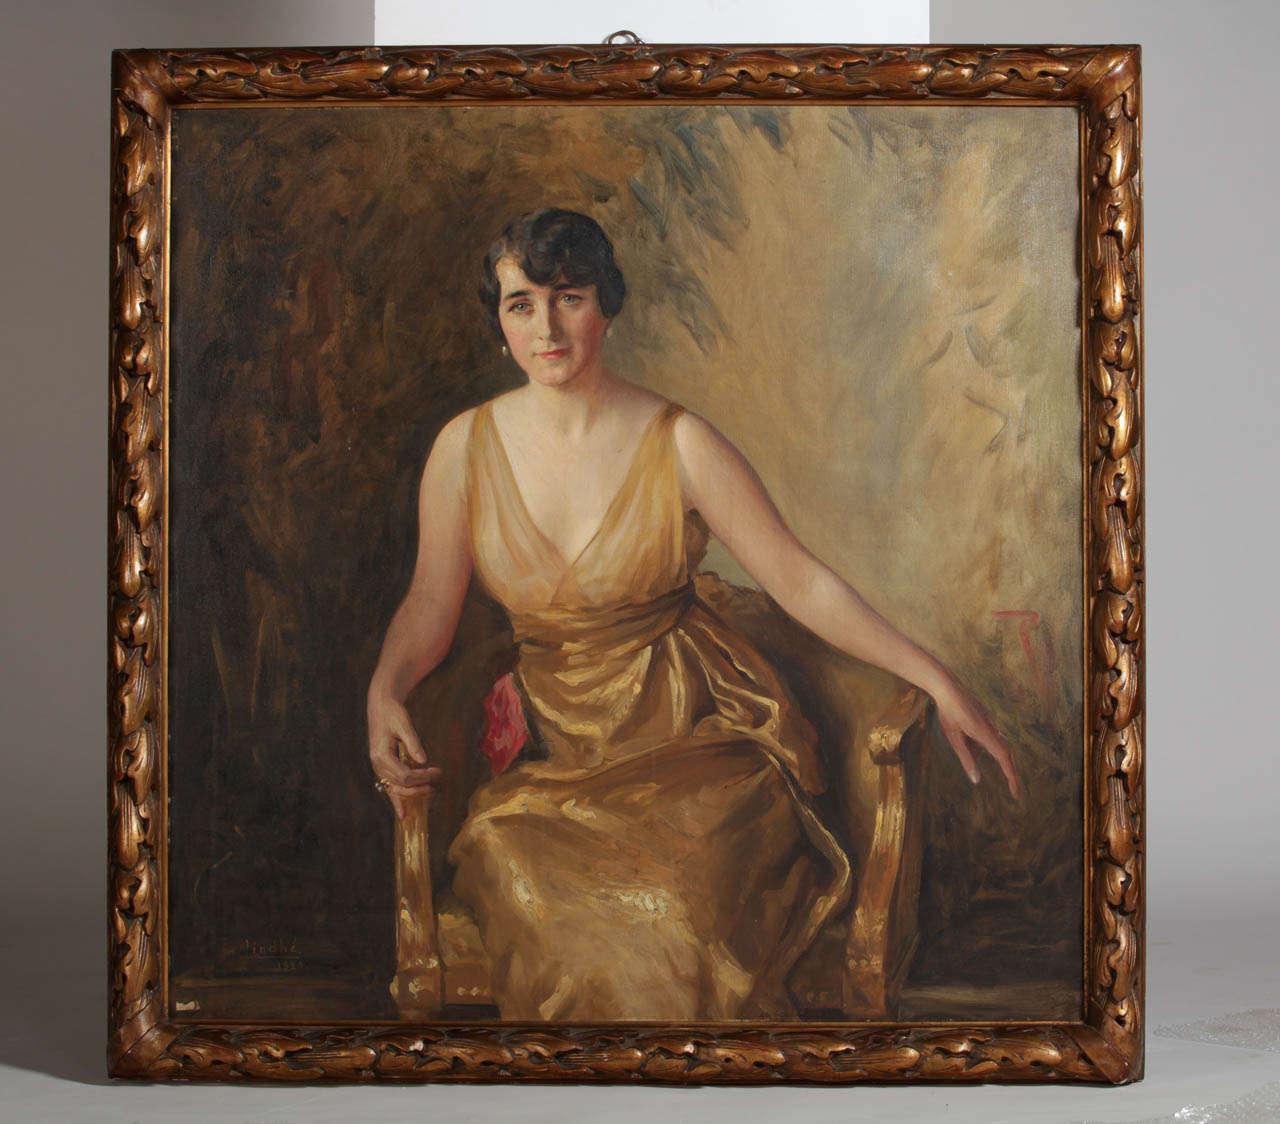 IVAN LINDHE (1875-1931) PORTRAIT OF A YOUNG LADY Seated  with a carved and giltwood frame.
 Signed and dated 1920, oil on canvas, cm 115x115 frame 130x130